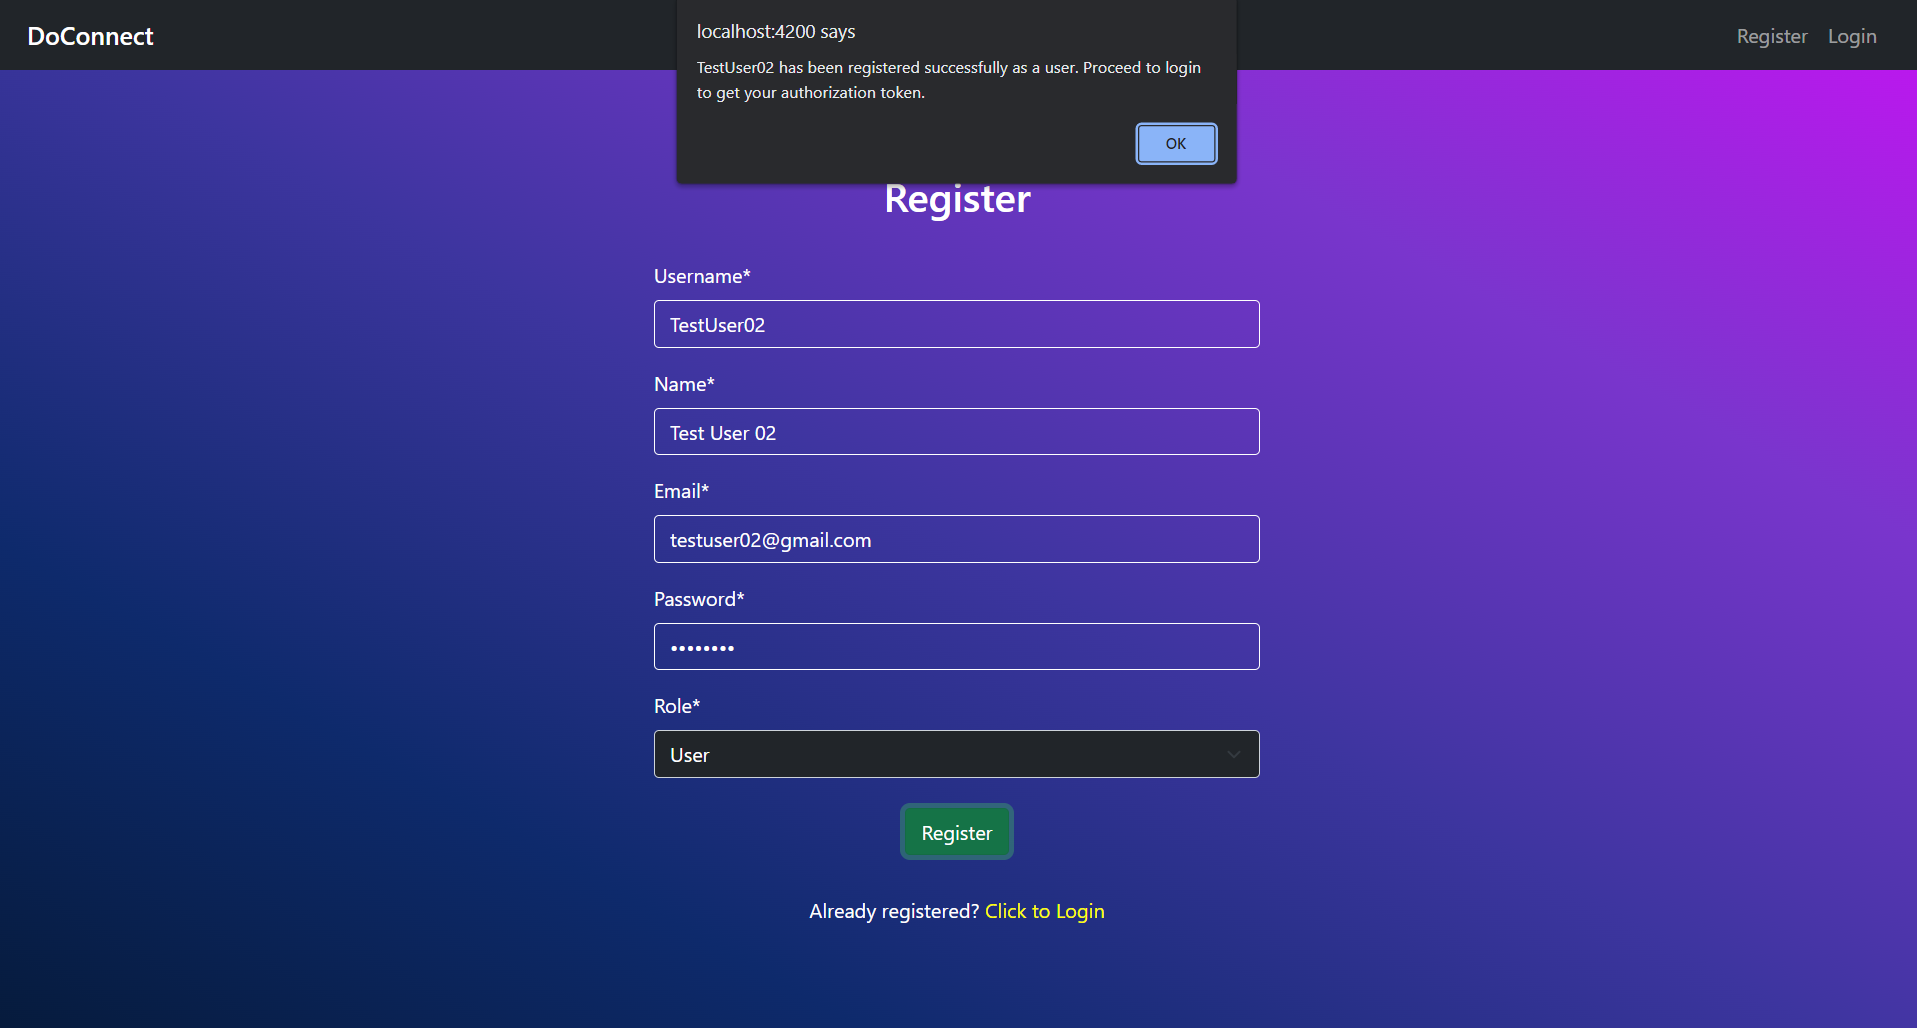 Registration as User Successful